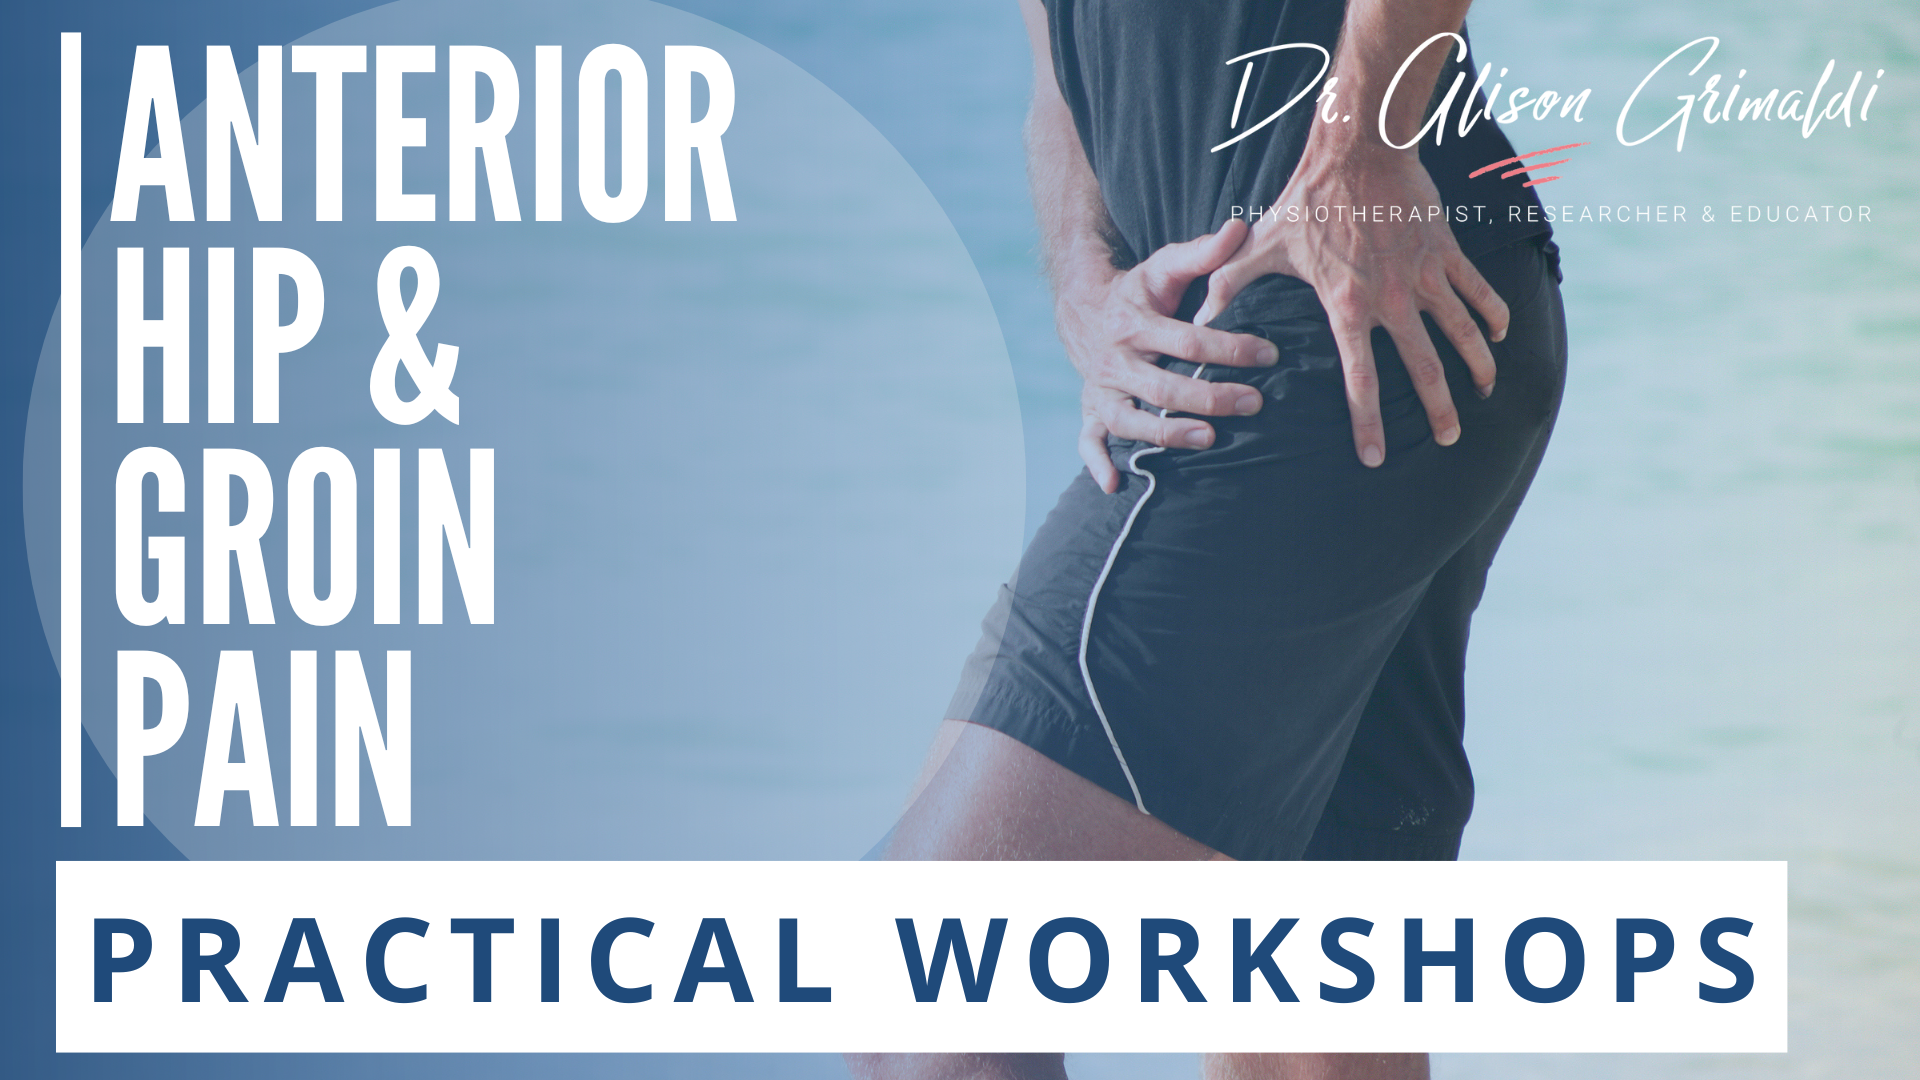 Anterior-hip-and-groing-pain-practical-workshops